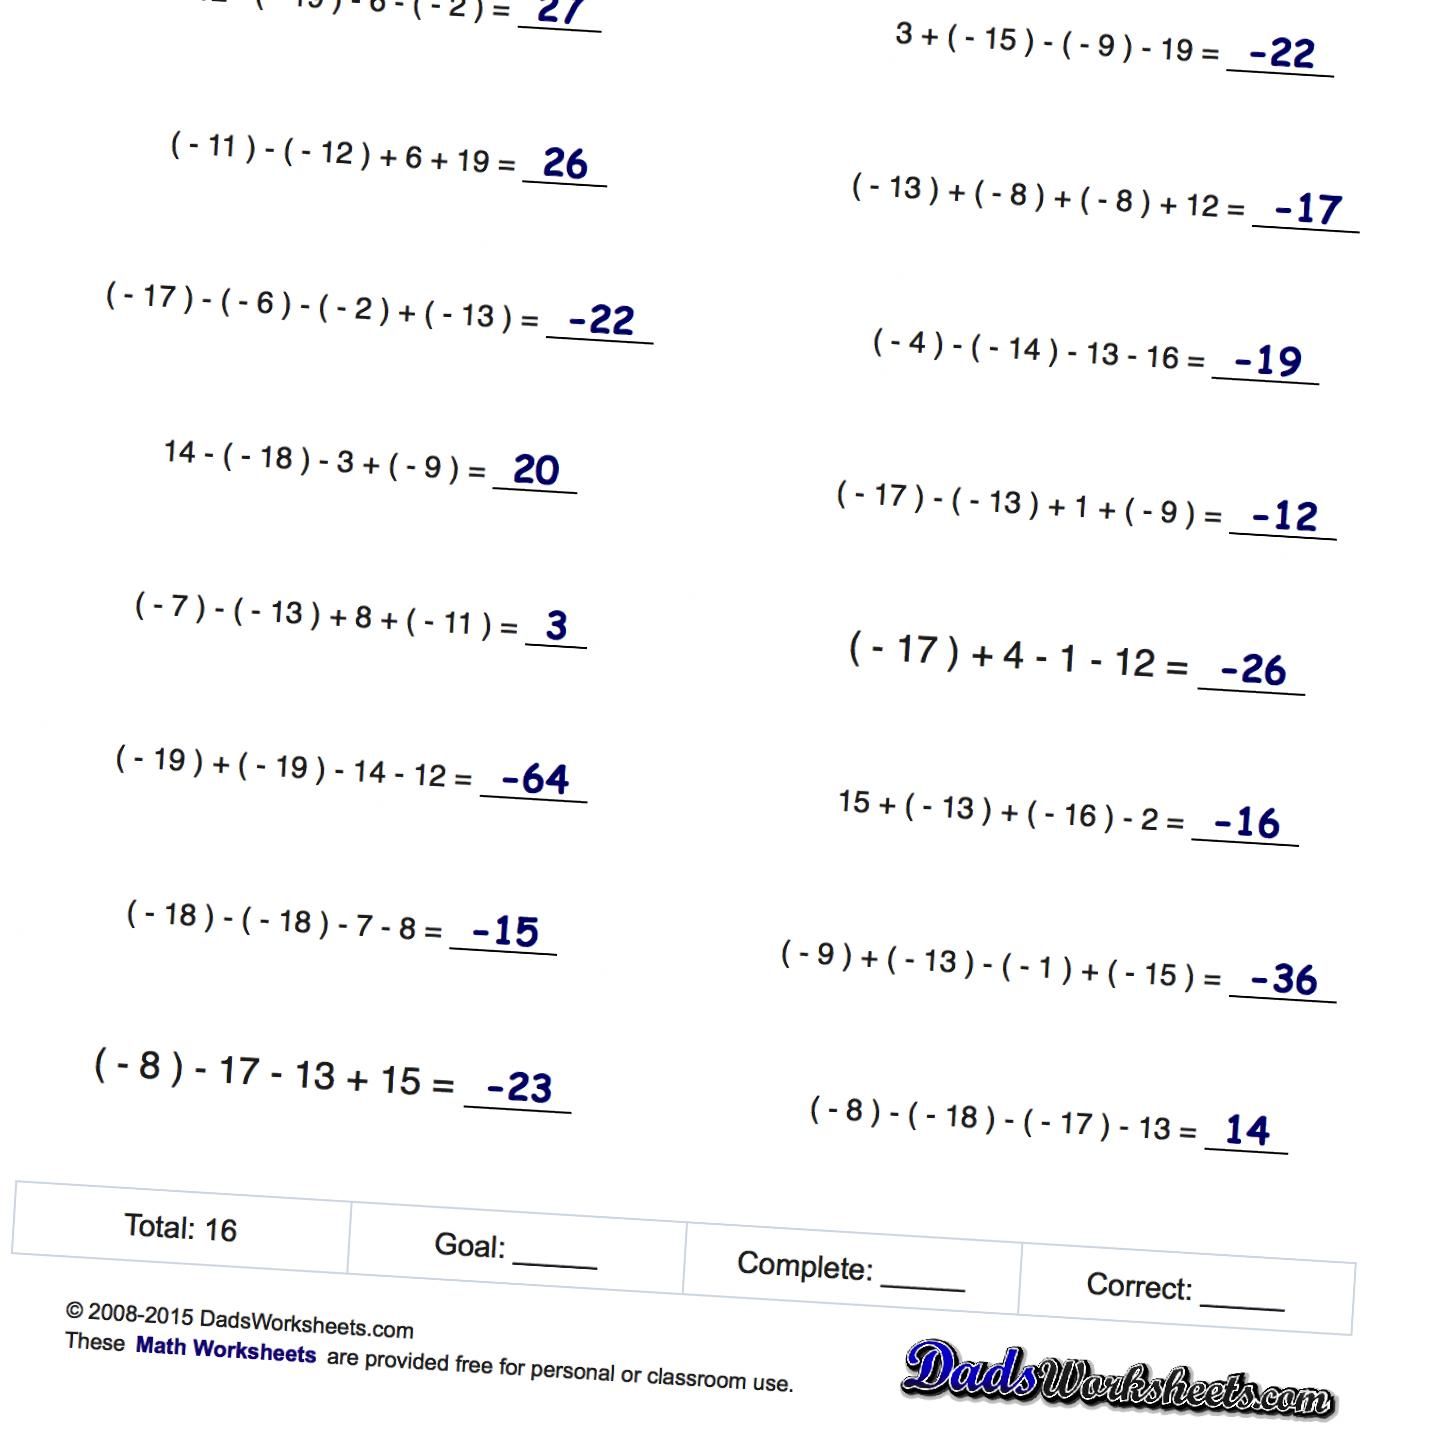 adding-negative-and-positive-numbers-worksheets